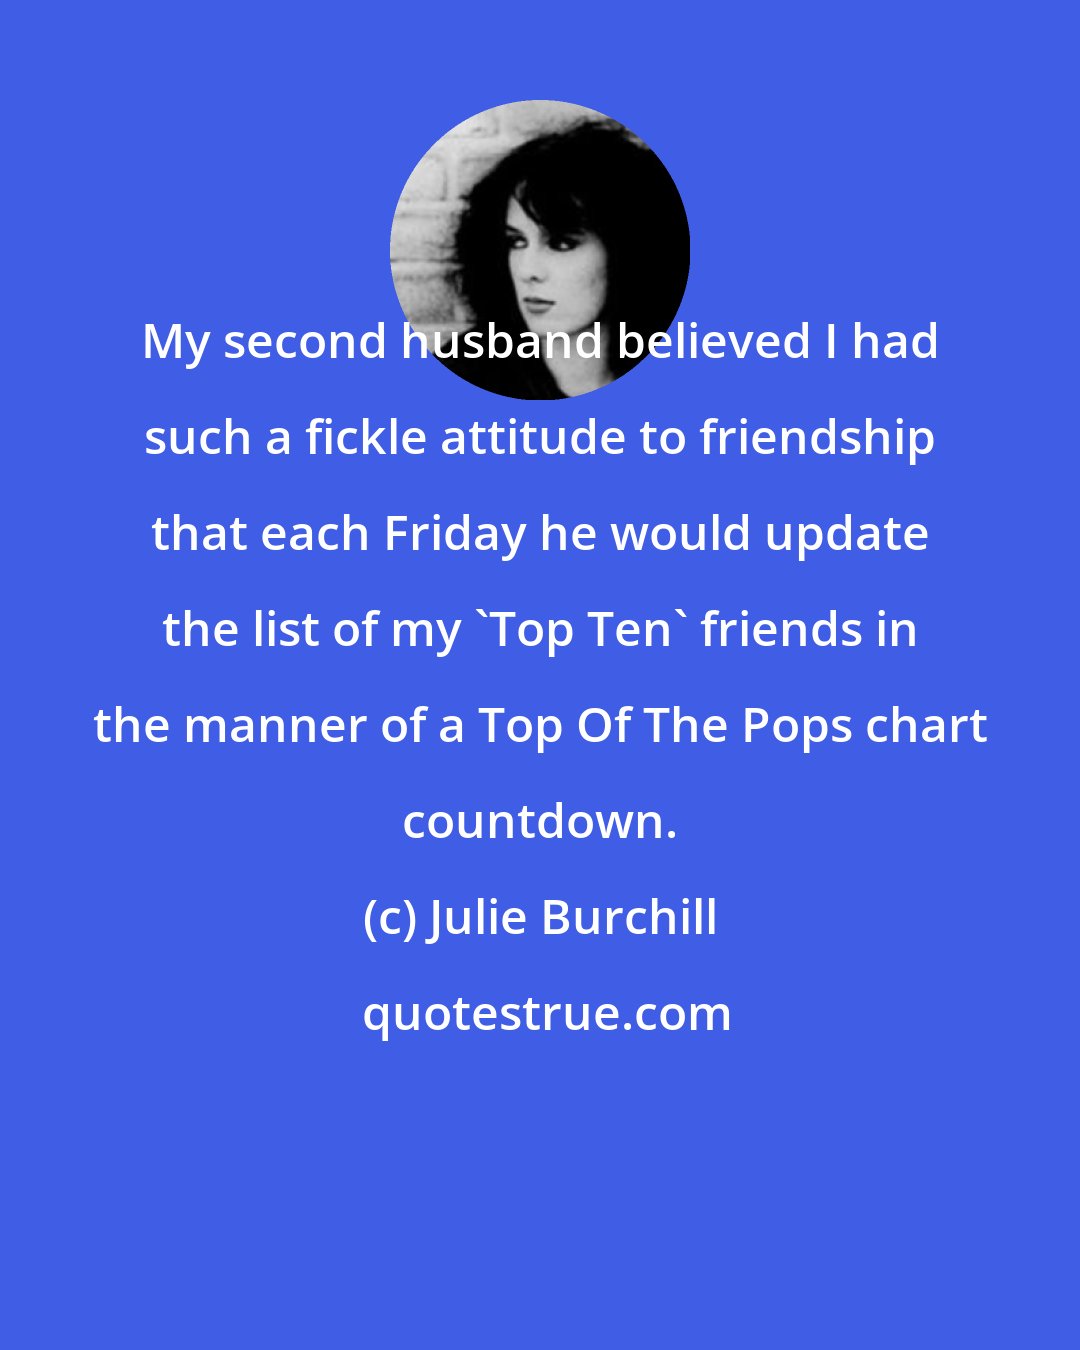 Julie Burchill: My second husband believed I had such a fickle attitude to friendship that each Friday he would update the list of my 'Top Ten' friends in the manner of a Top Of The Pops chart countdown.